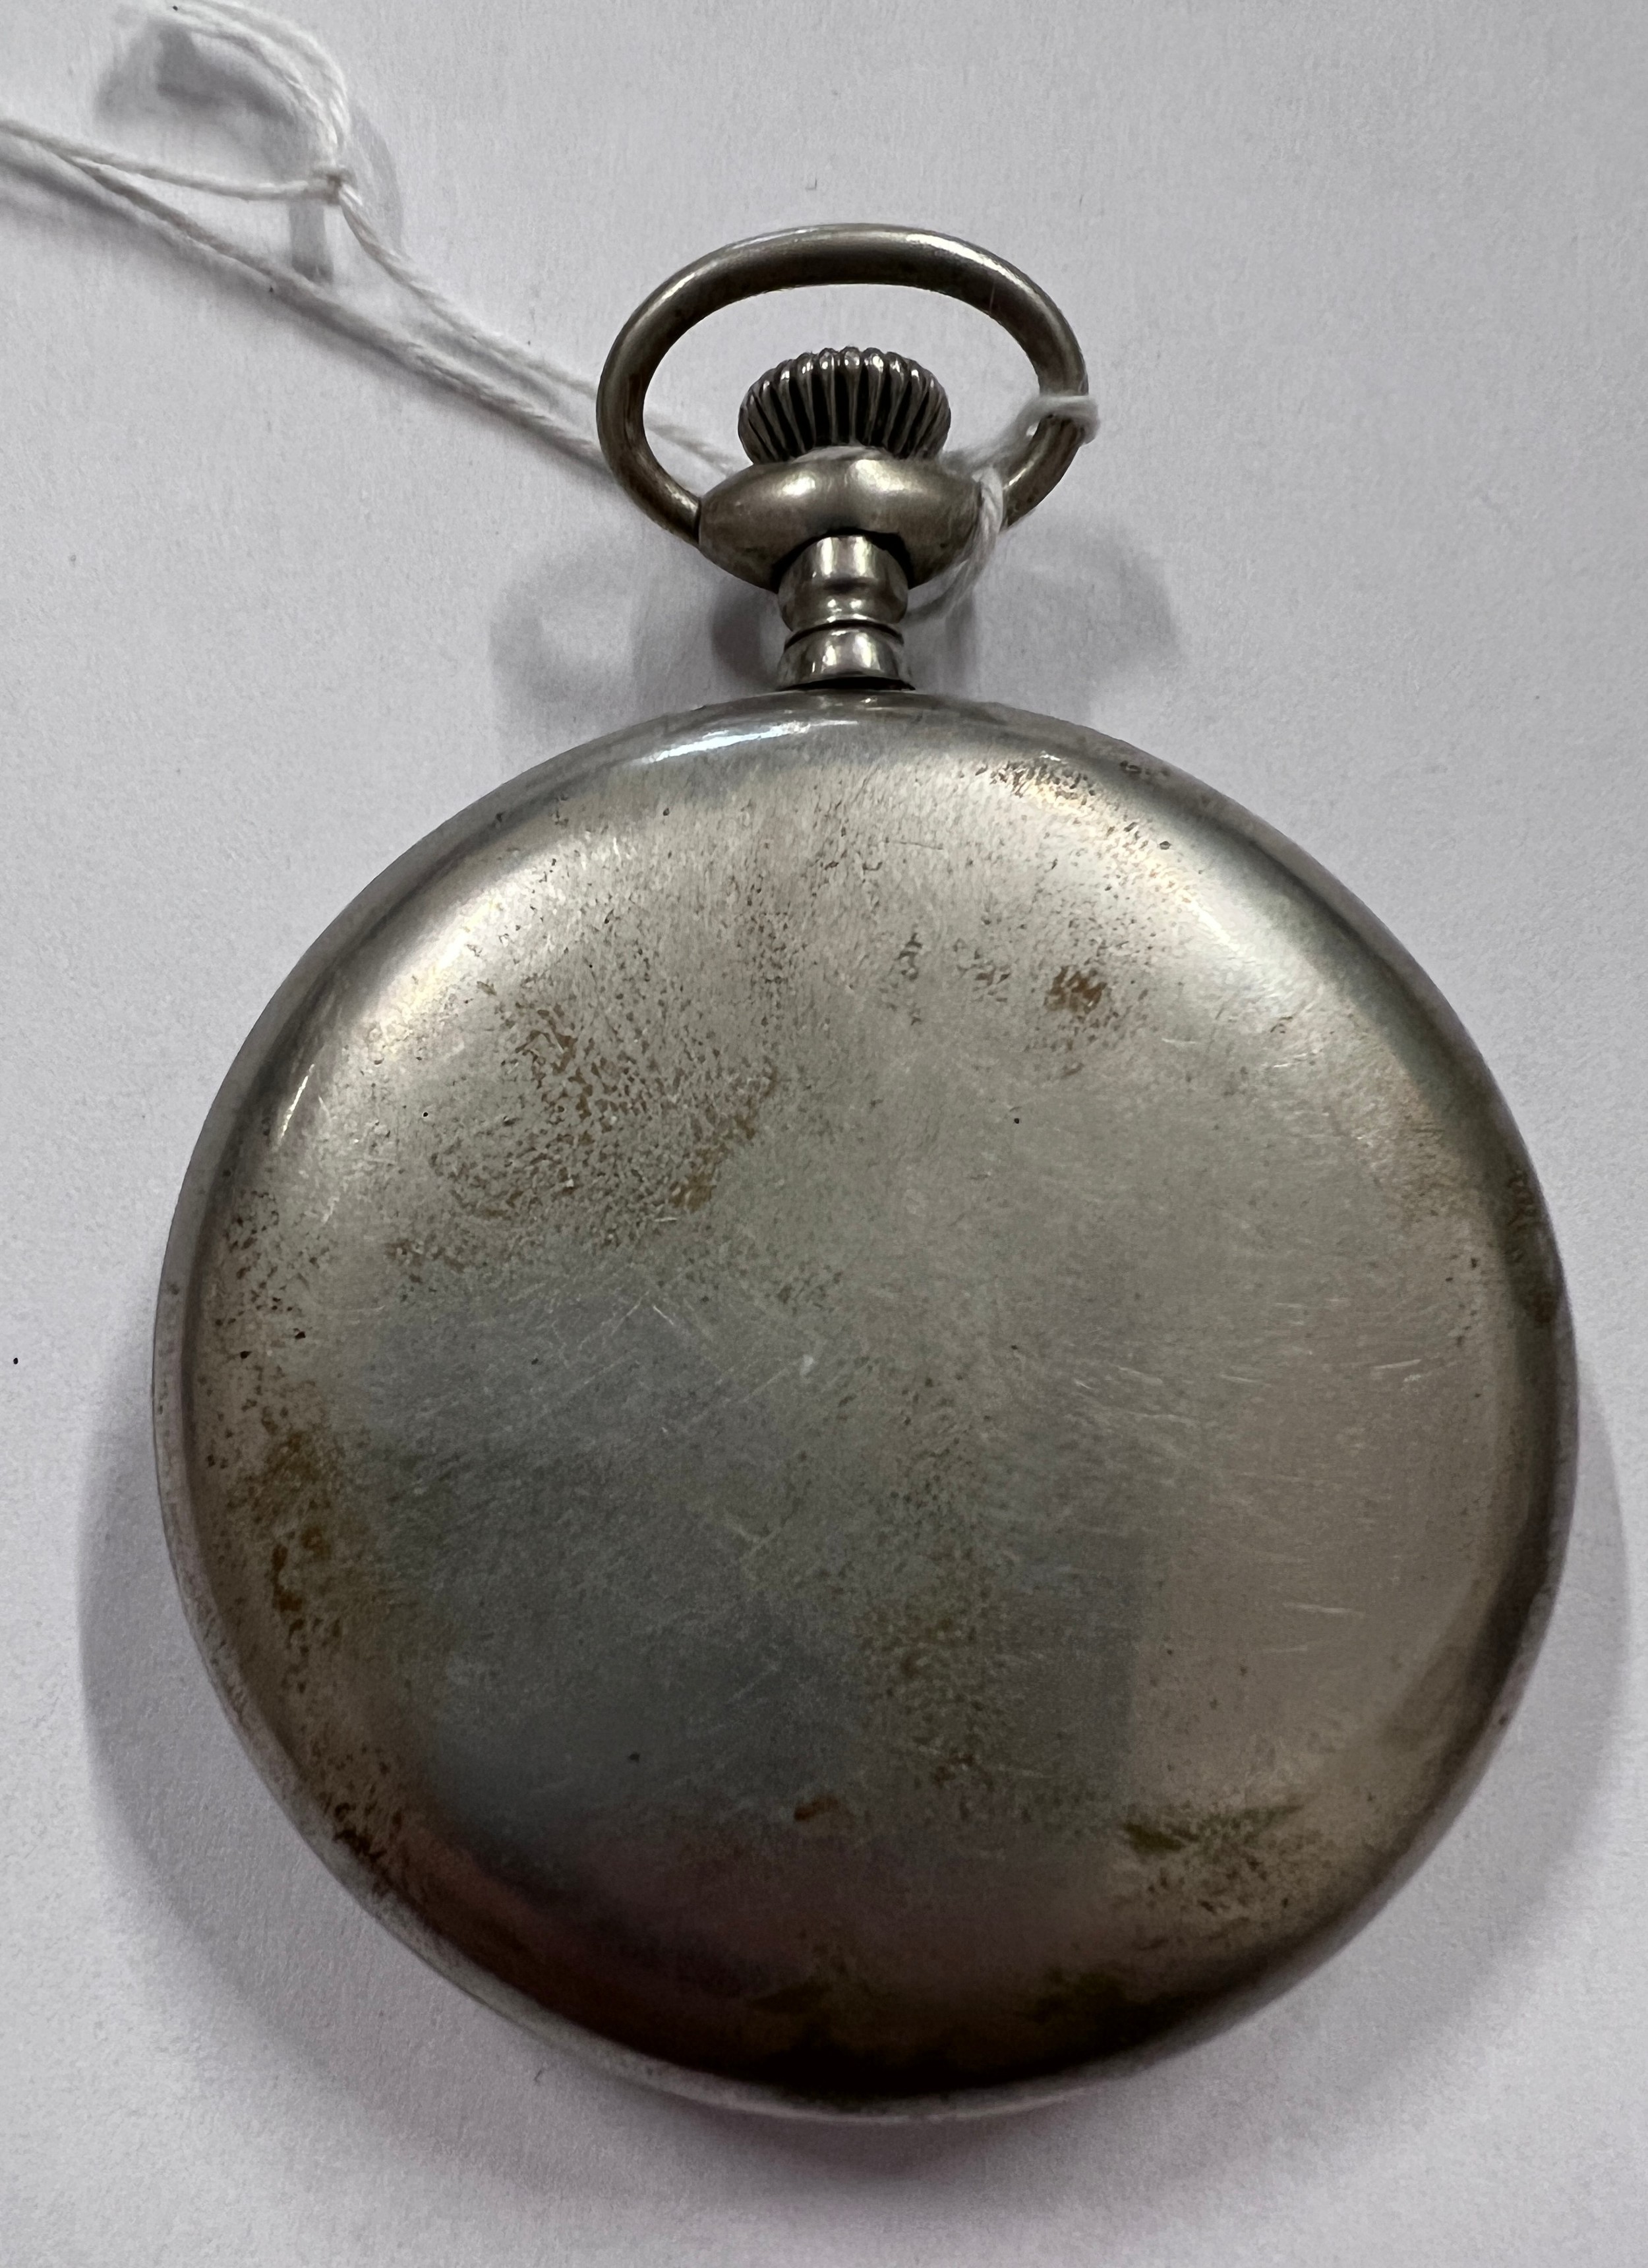 An Elgin pocket watch. Winds and goes. - Image 2 of 3